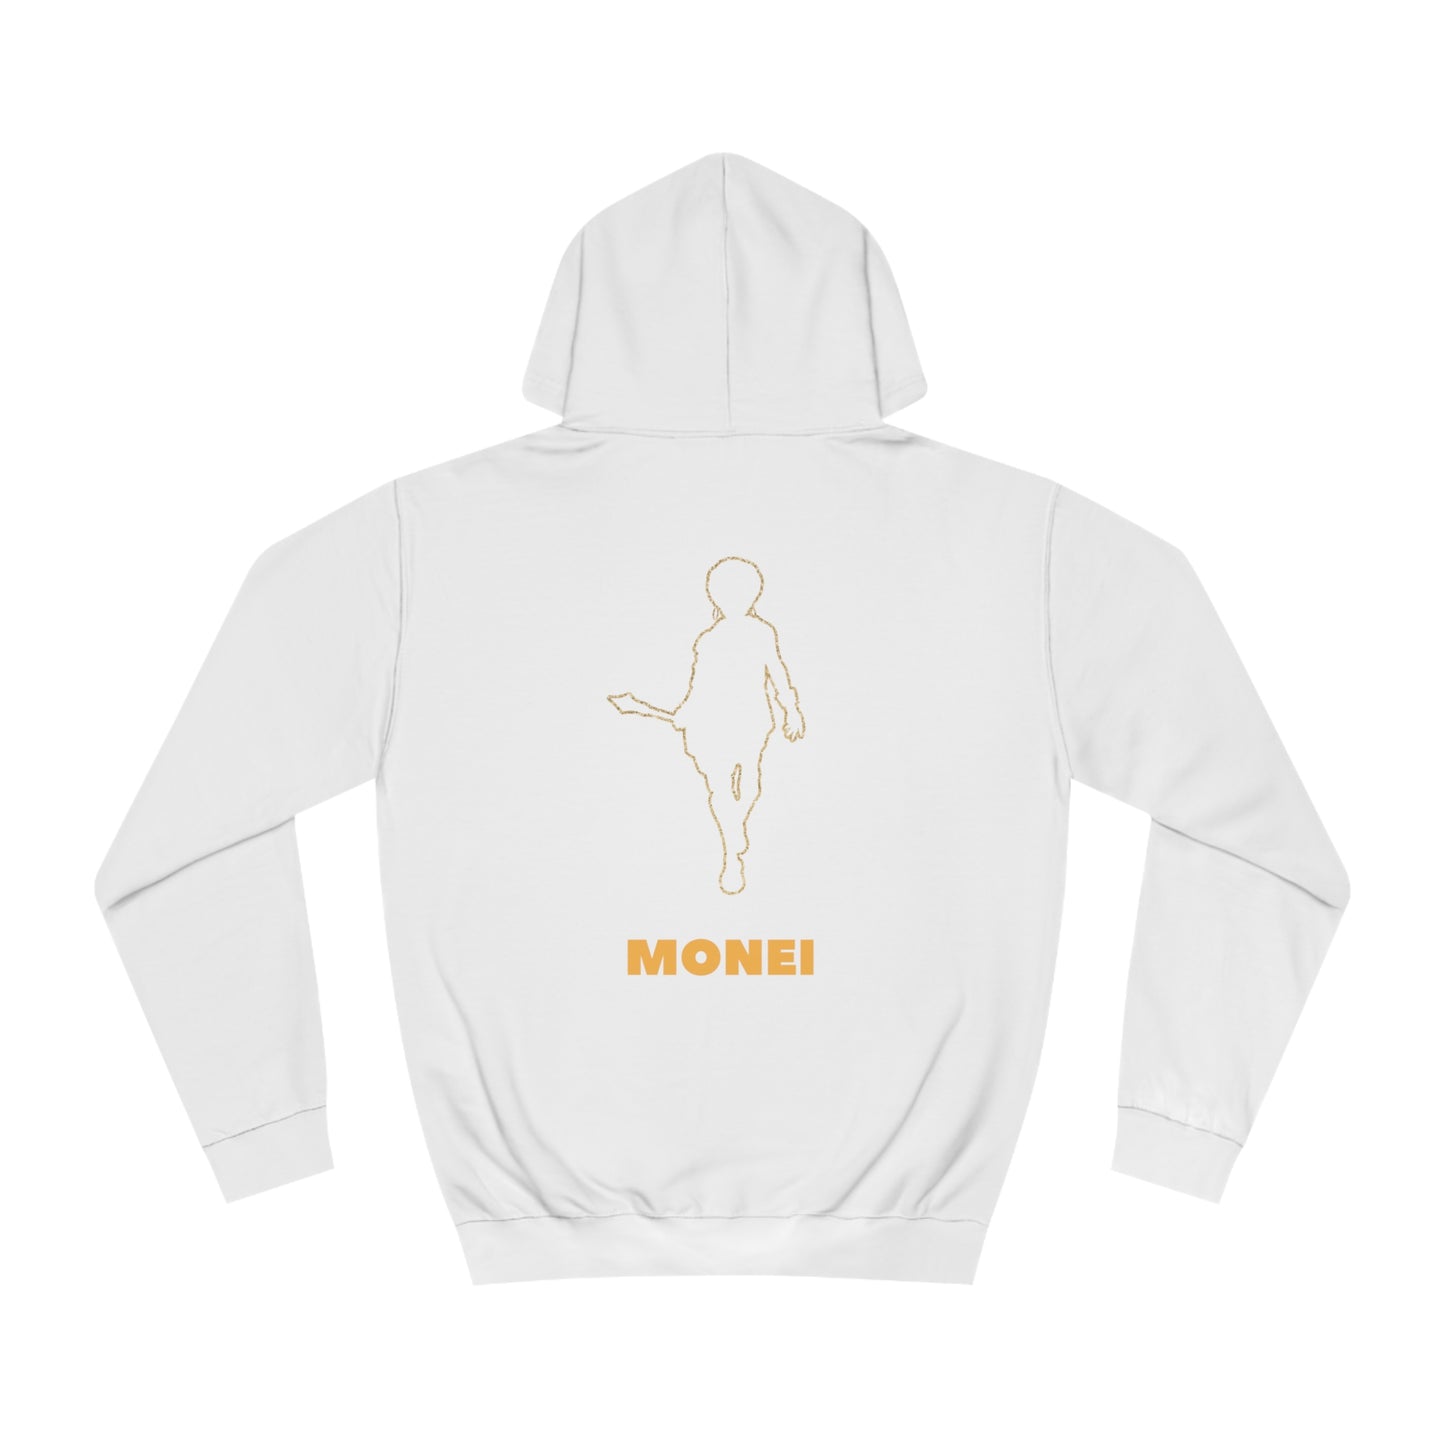 New Monei College Hoodie Includes Back Designs